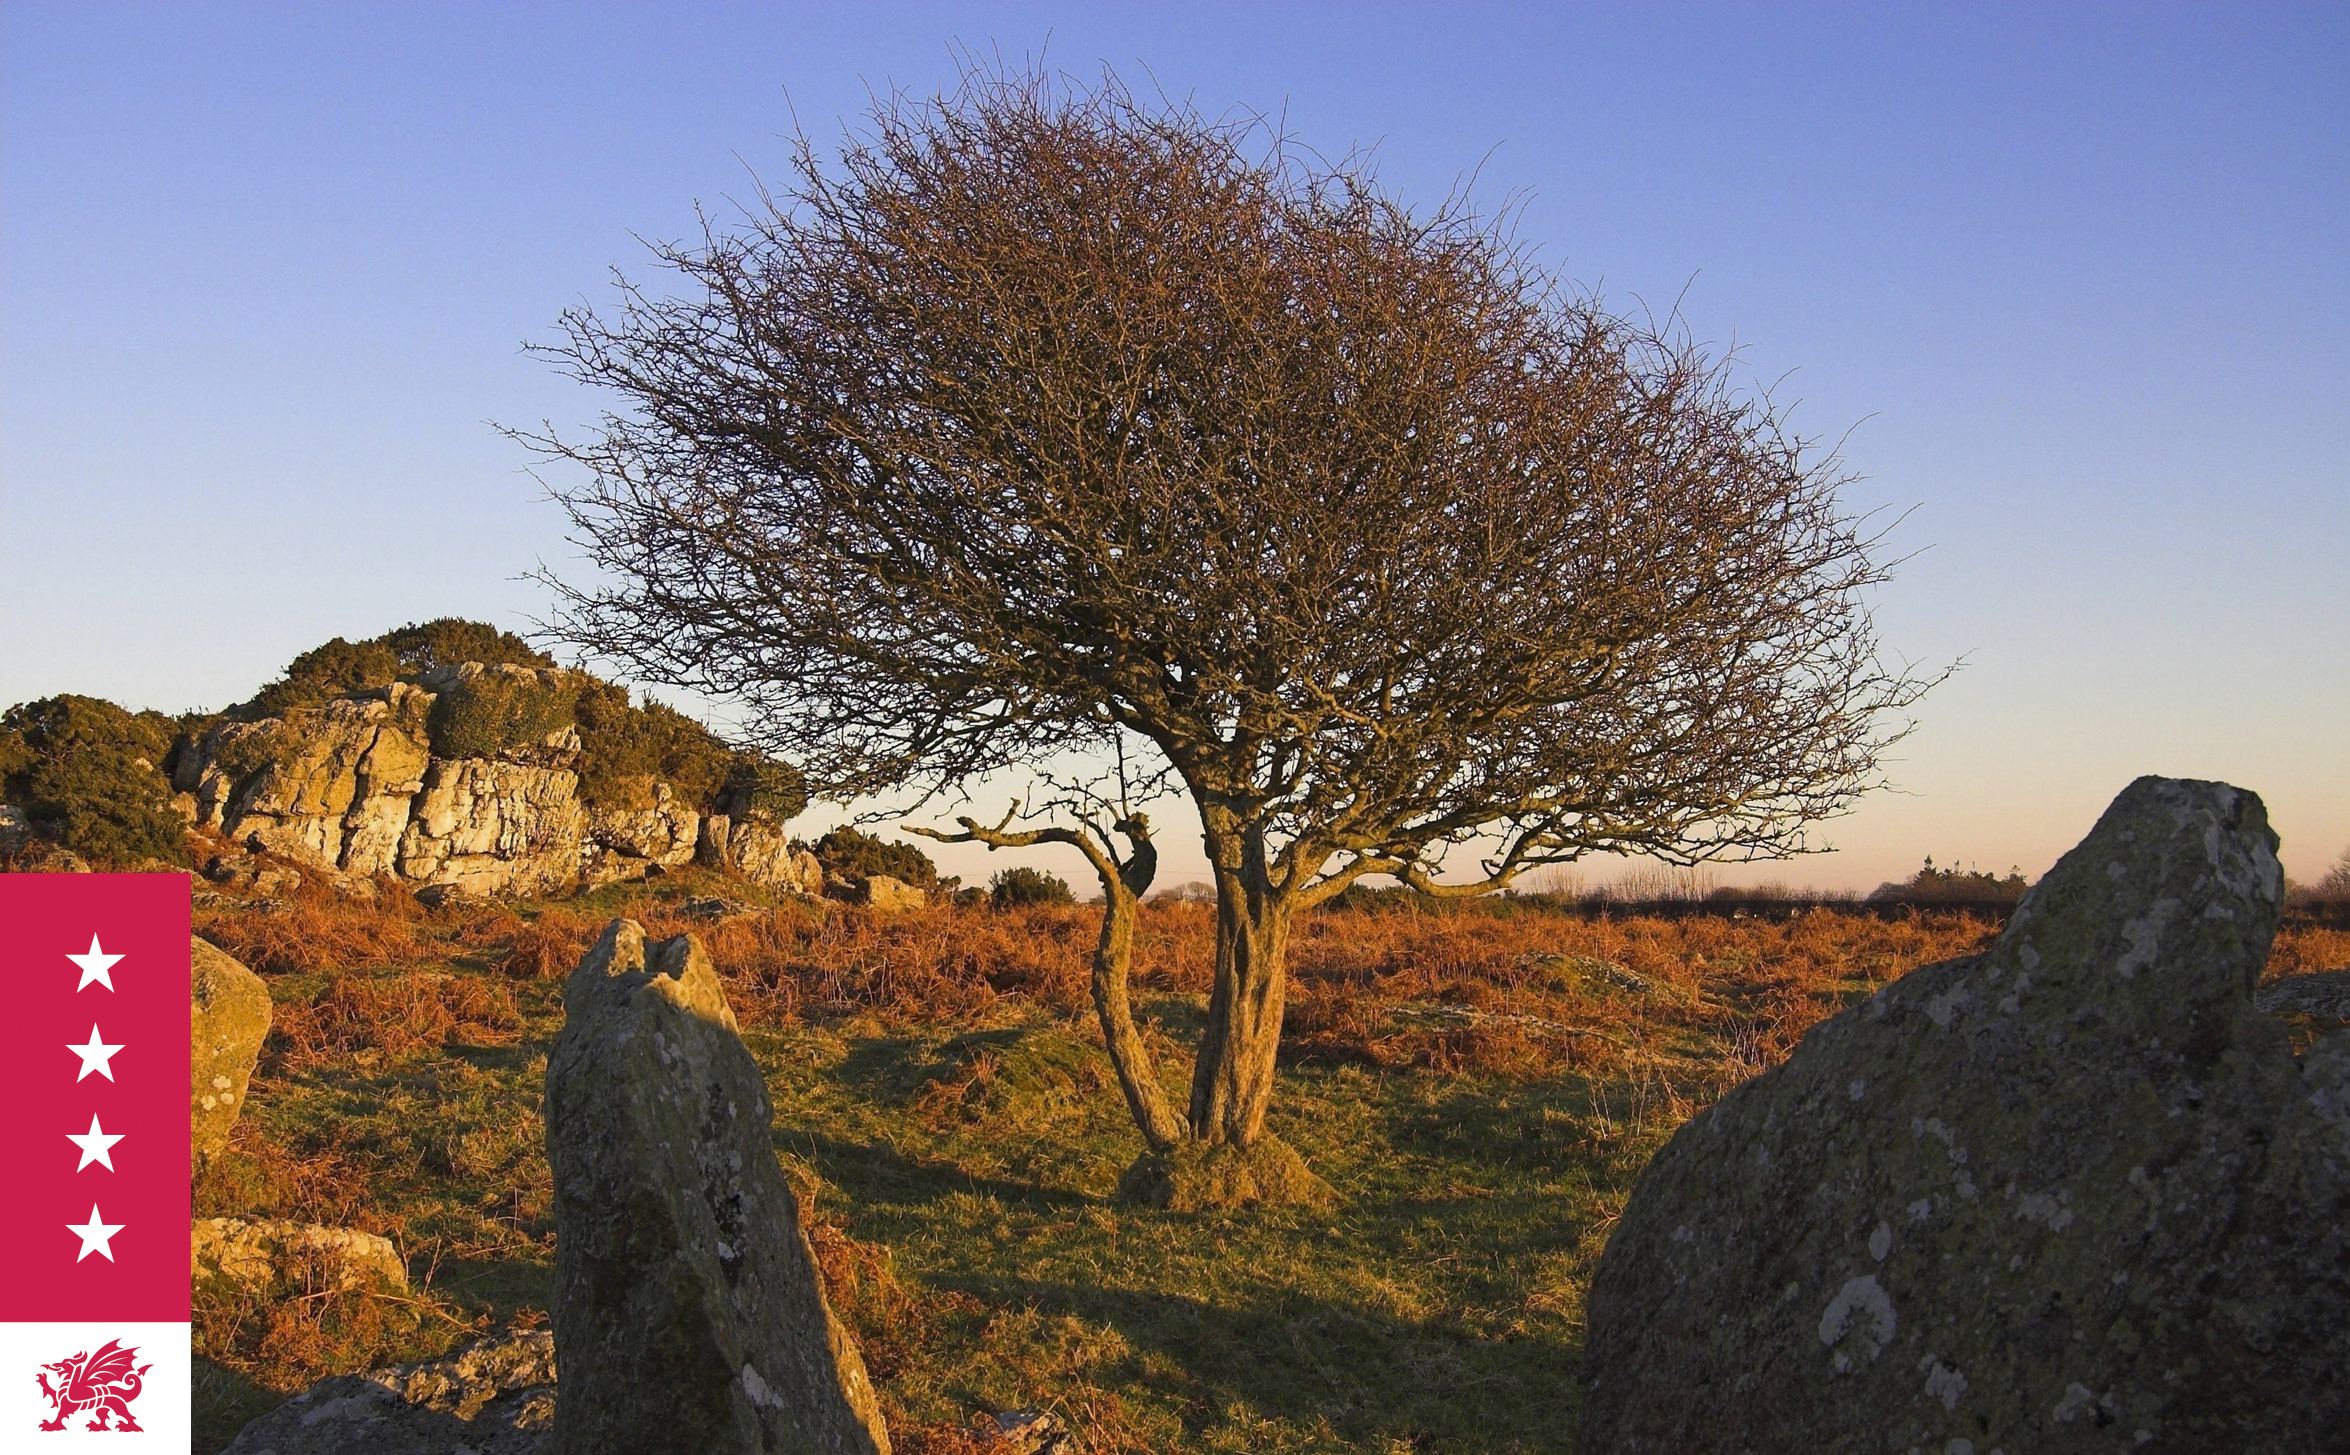 Ancient landscapes and rock formations in Pembrokeshire